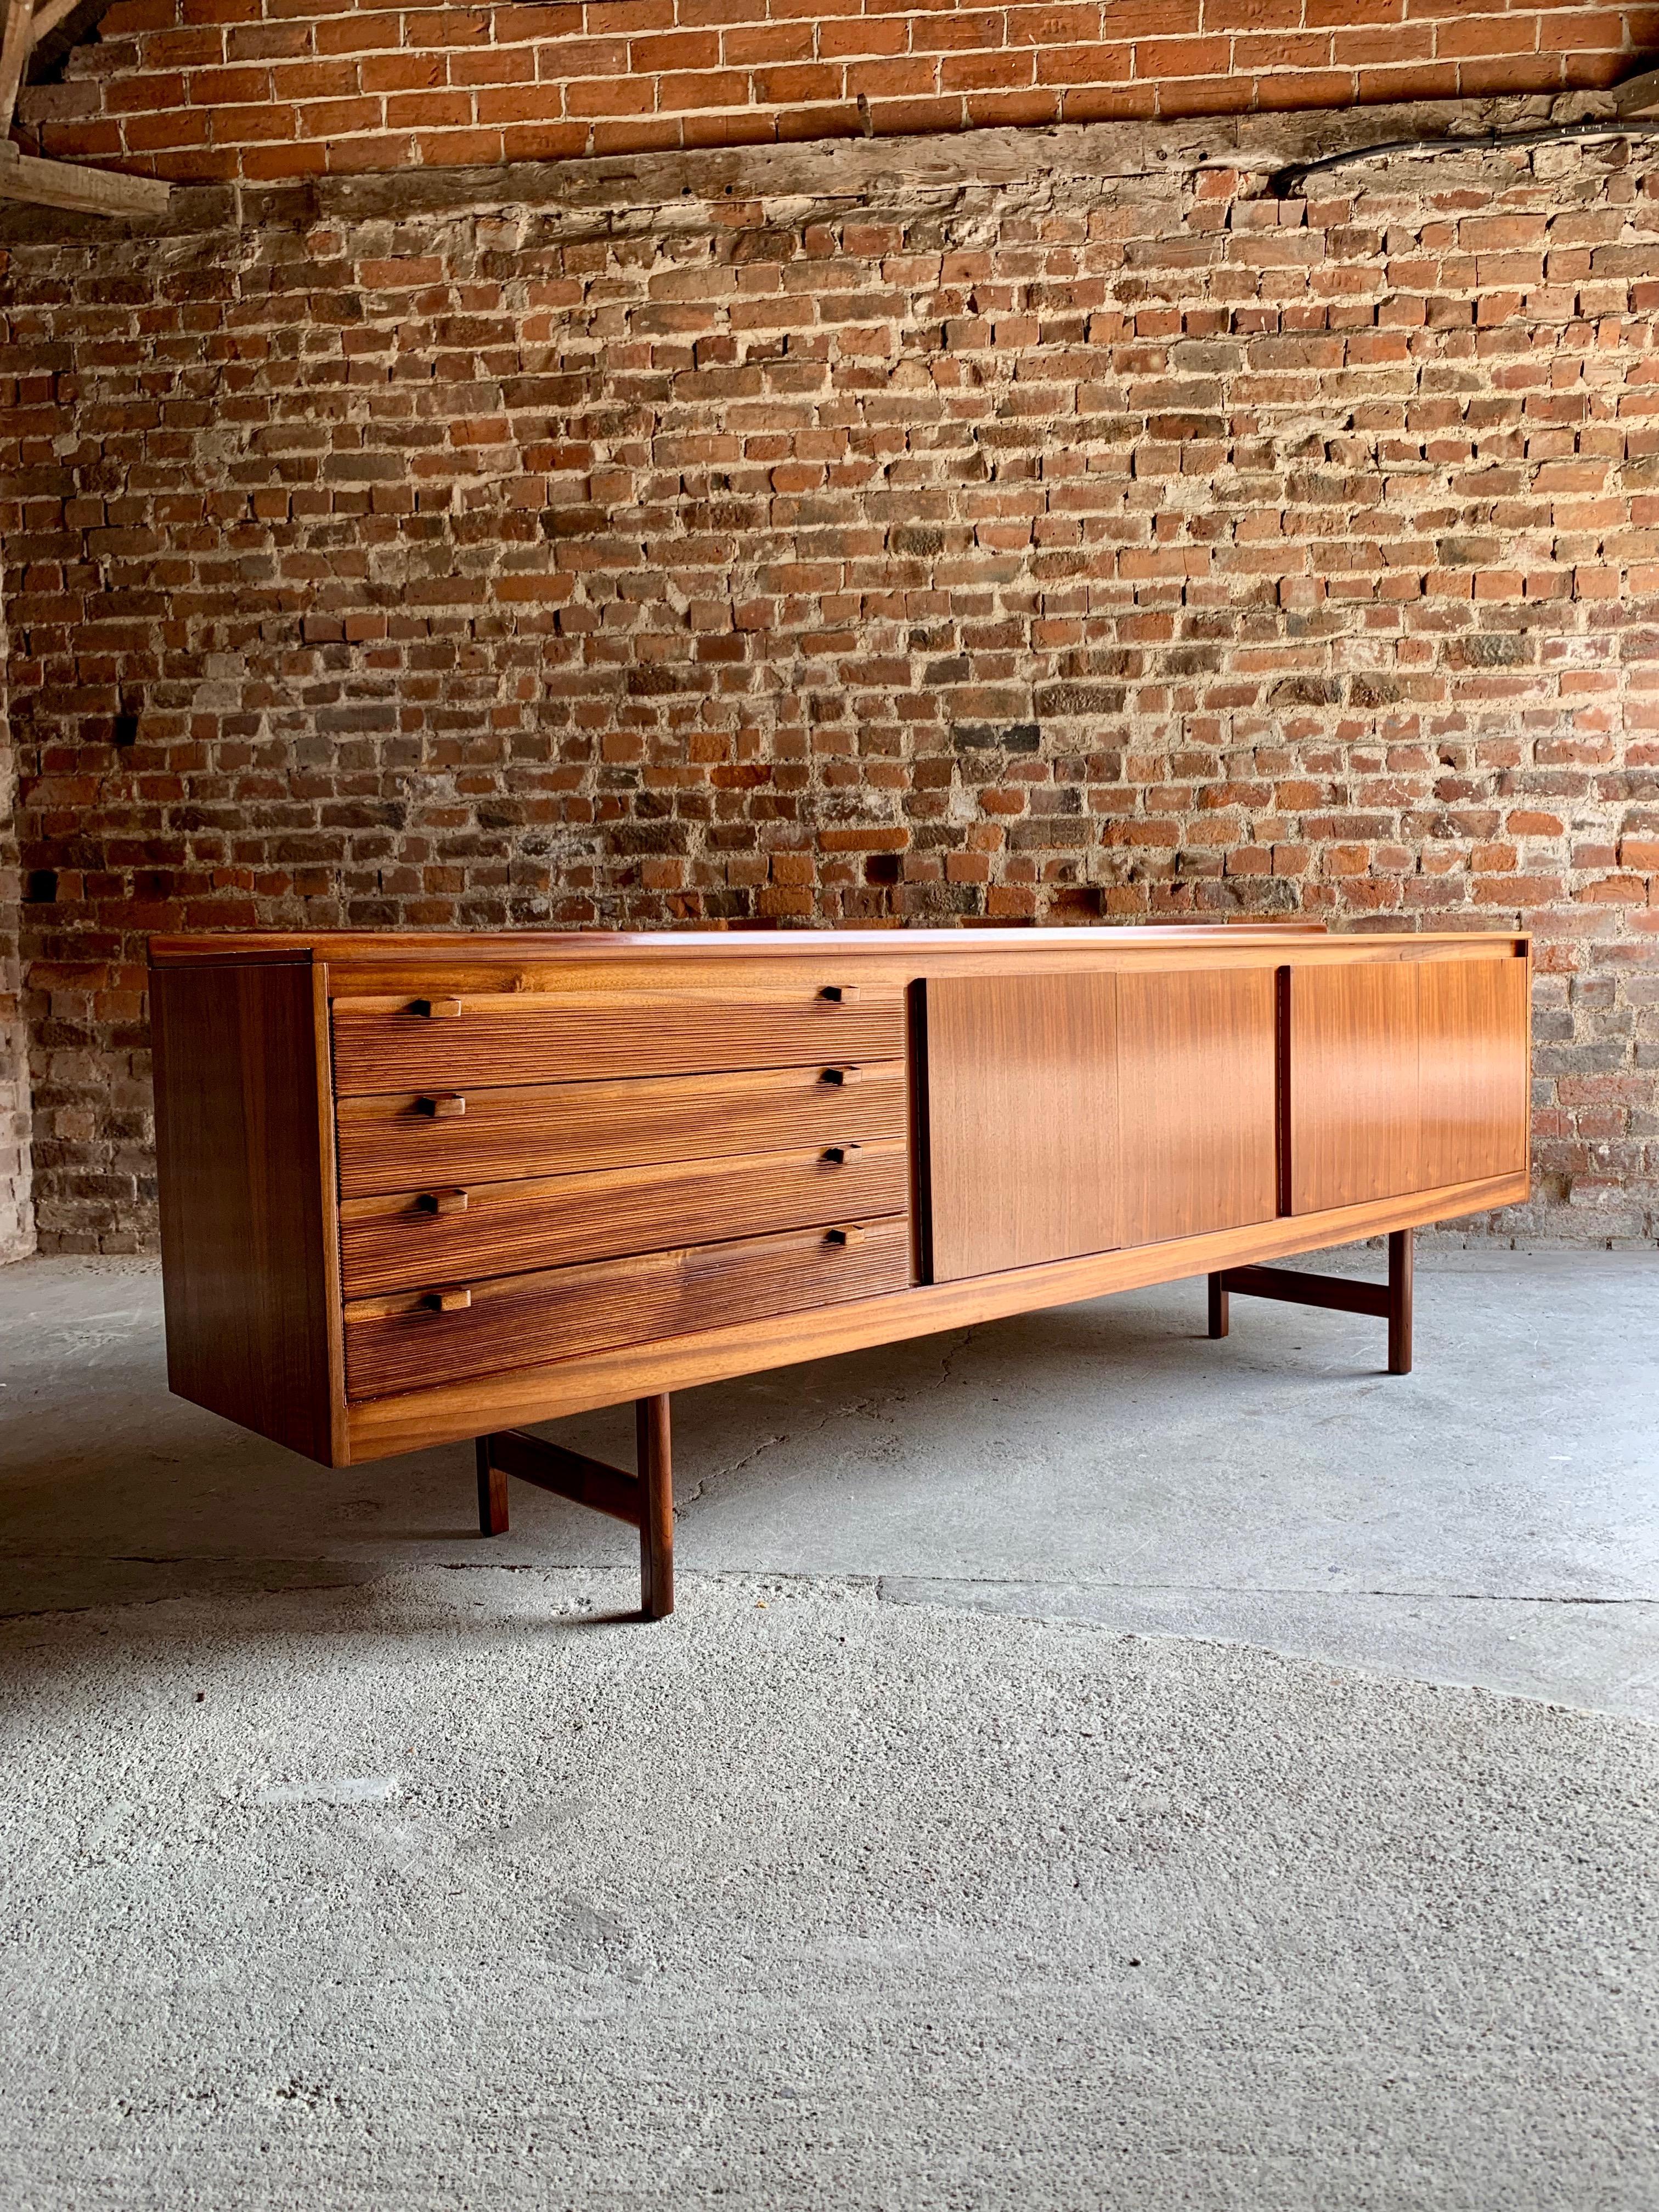 English Robert Heritage Knightsbridge Rosewood Sideboard Credenza by Archie Shine, 1960s